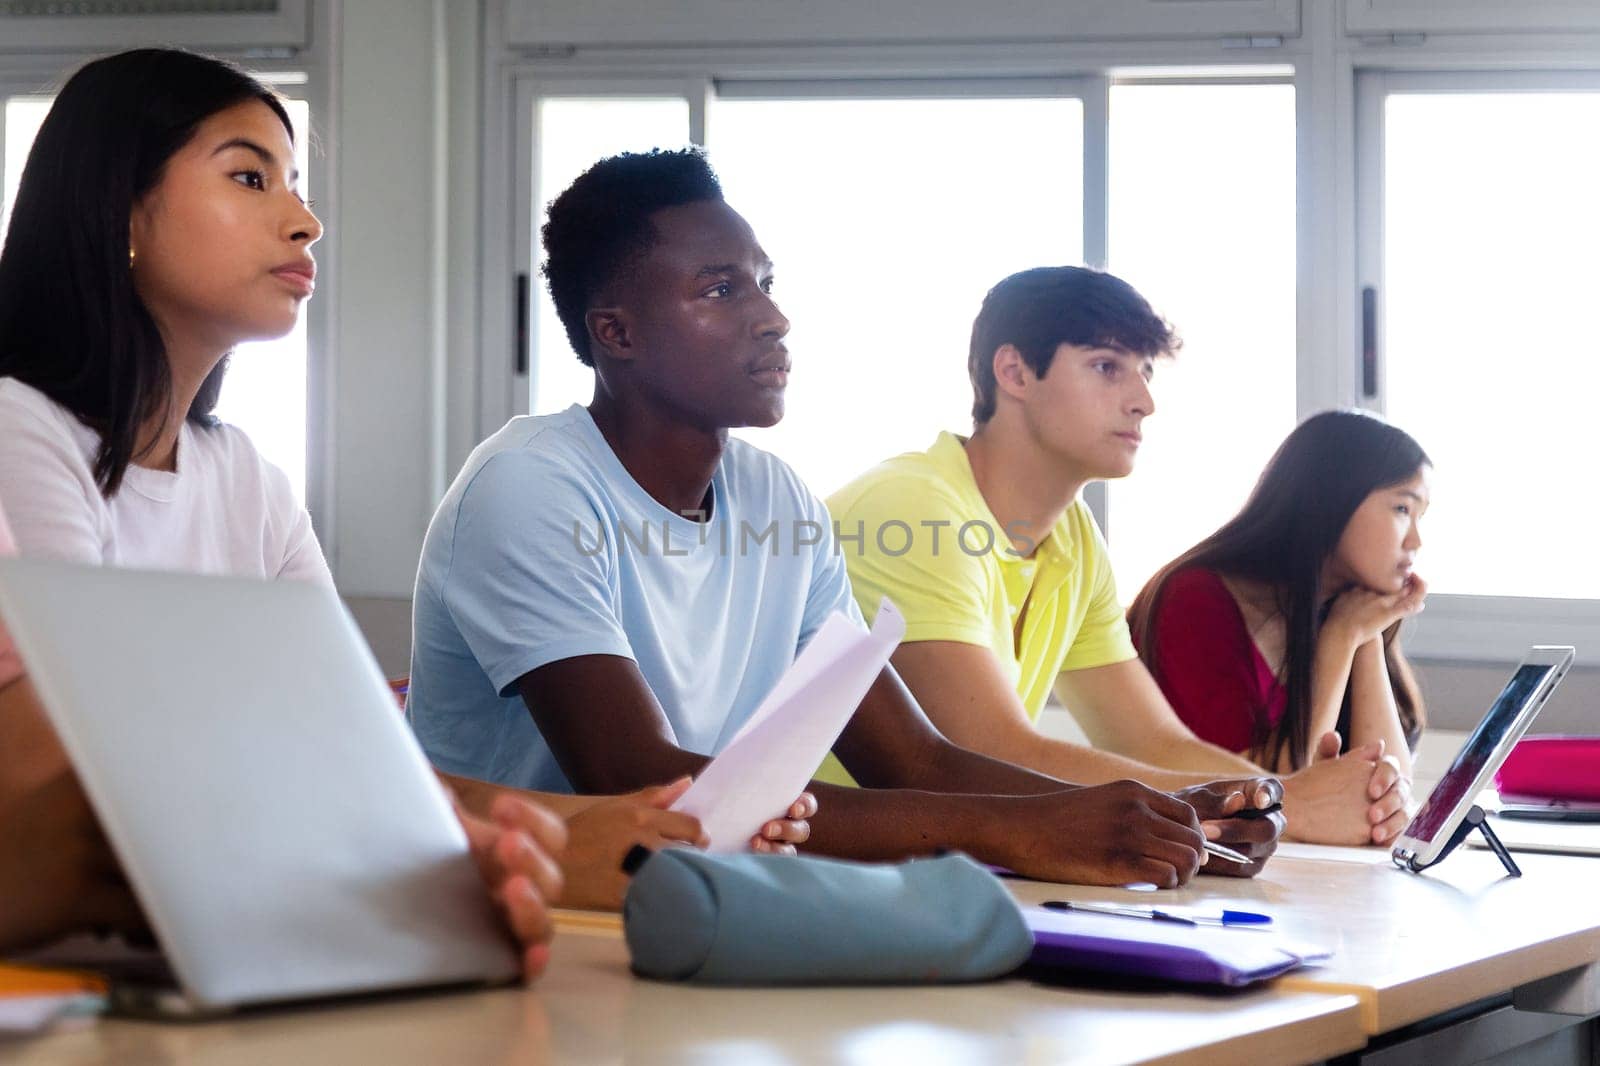 Black teen high school student in class listening to lecture with multiracial classmates. Focus on african american boy. Education concept.